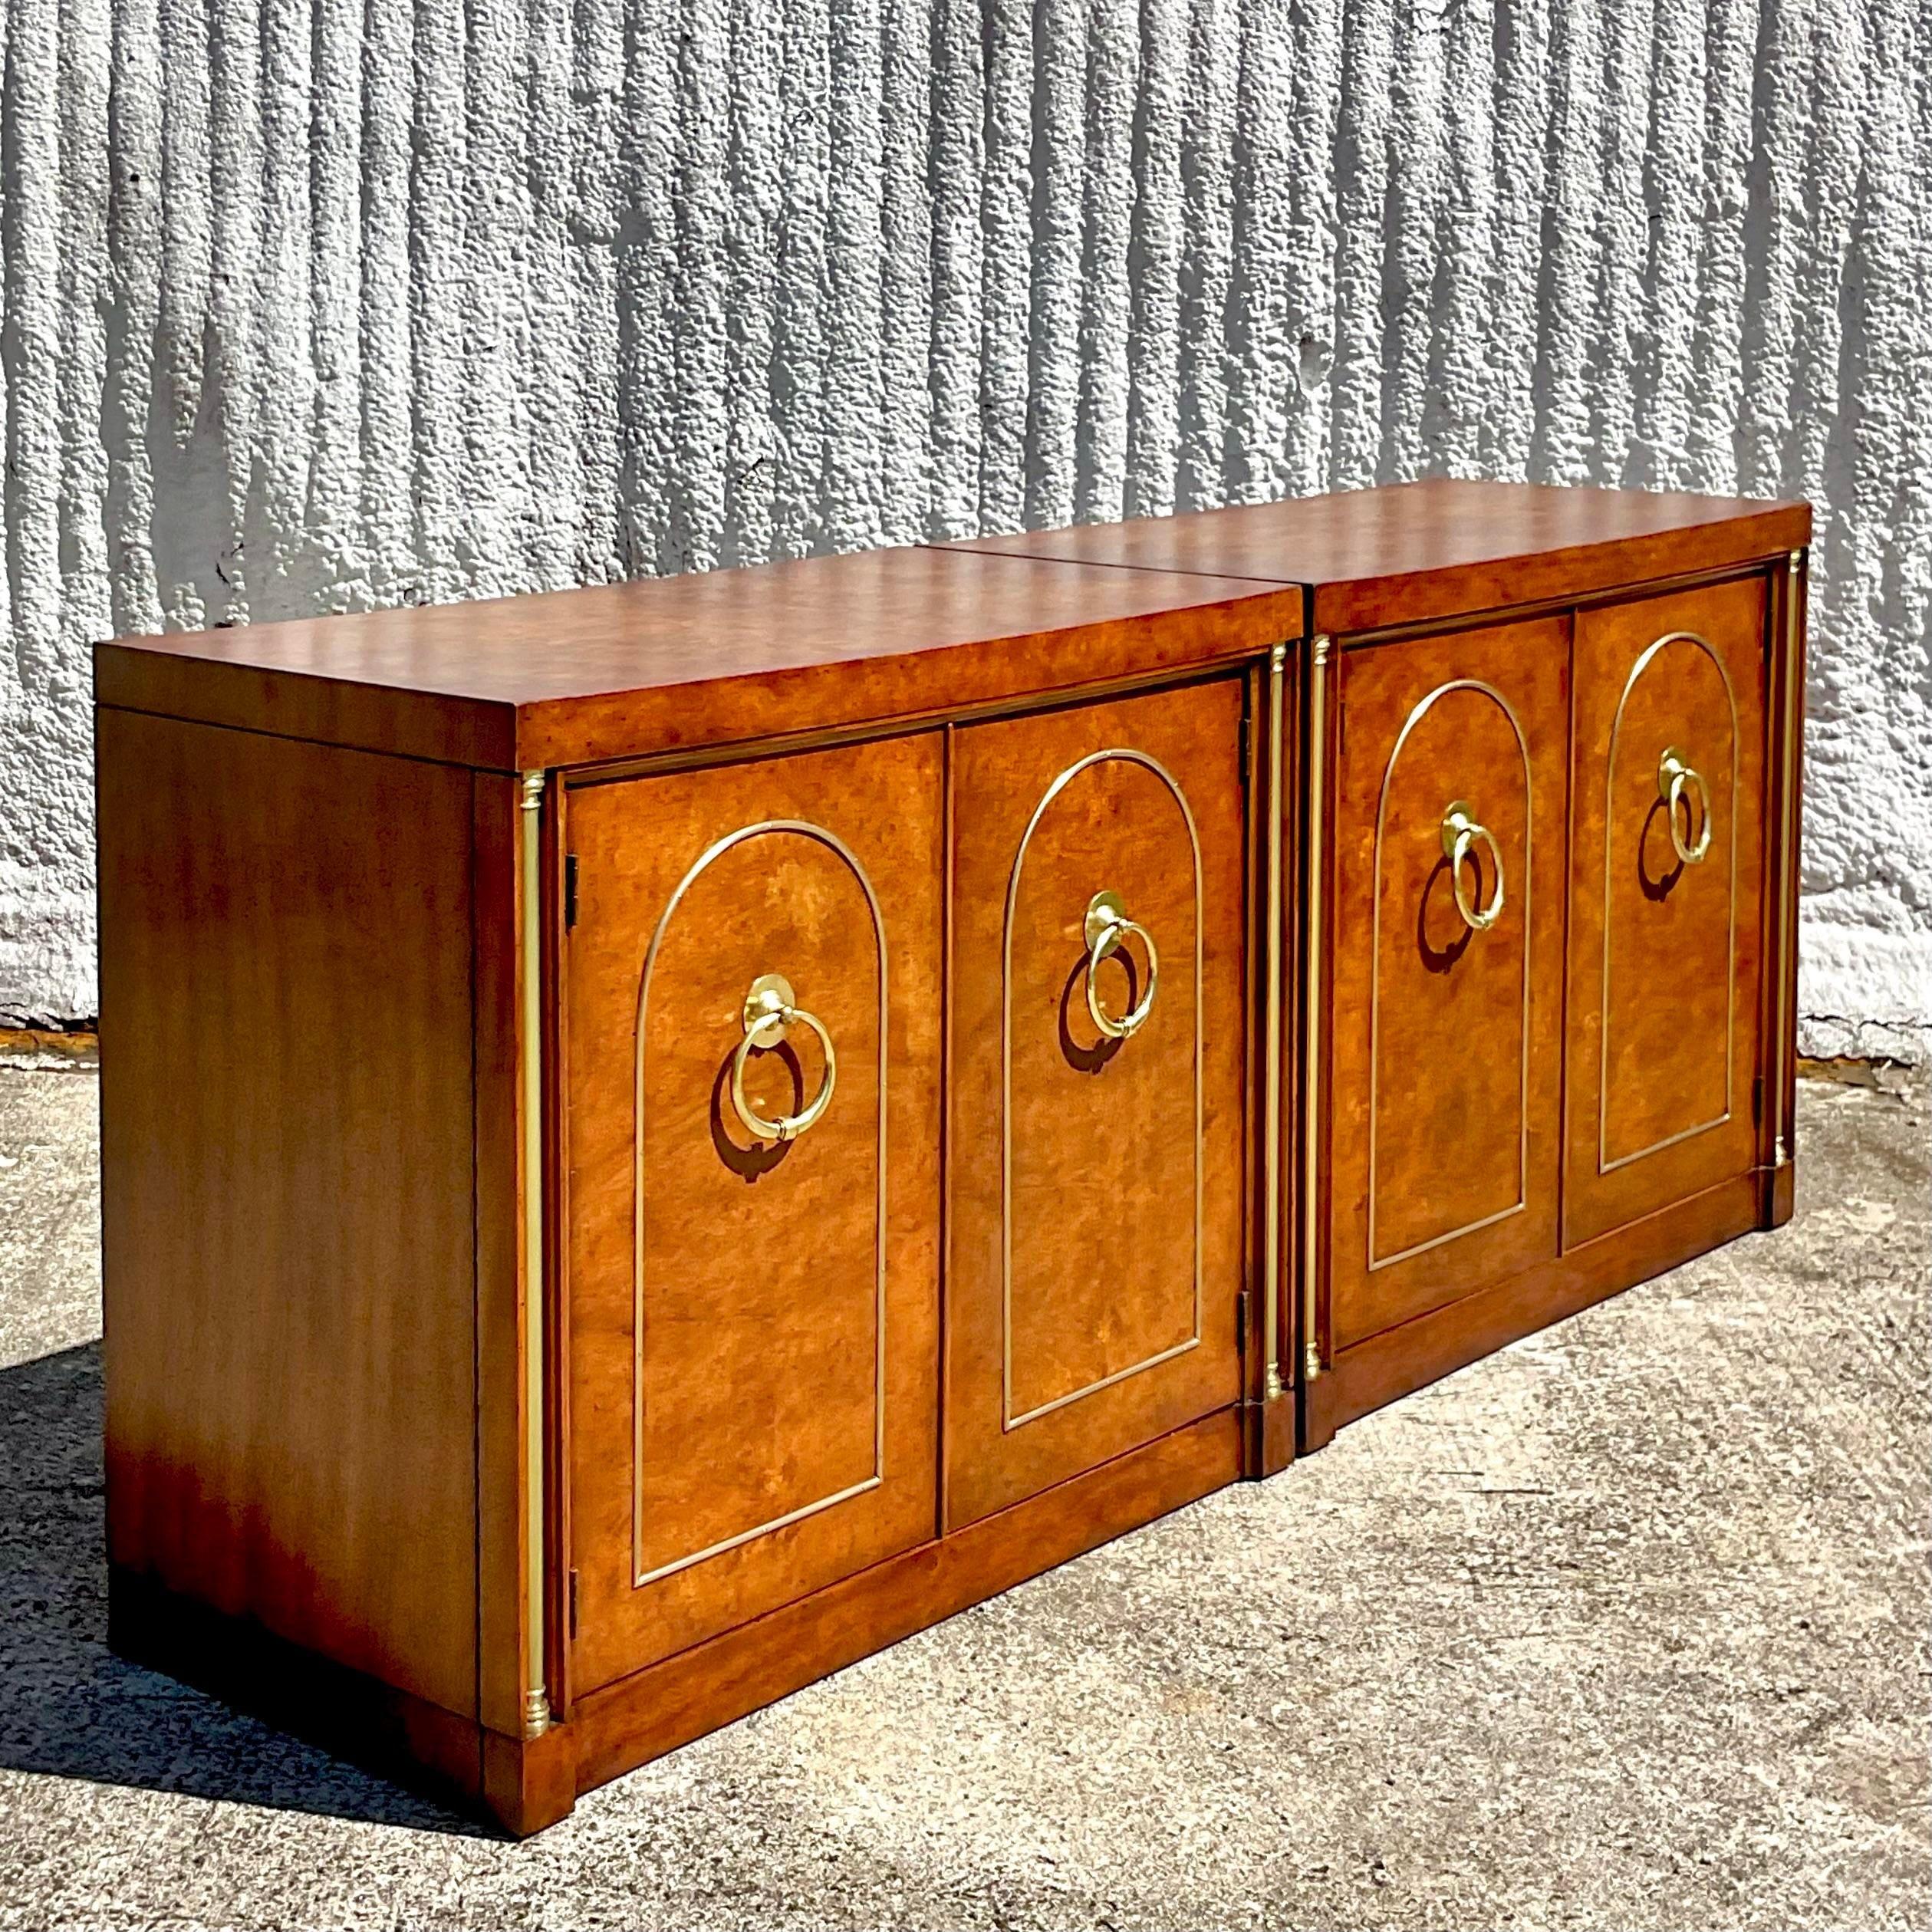 An exceptional pair of vintage Regency cabinets. Made by the iconic Weiman group and tagged inside the interior drawer. Beautiful Burl wood frame with incredible brass hardware. Acquired from a Palm Beach estate.